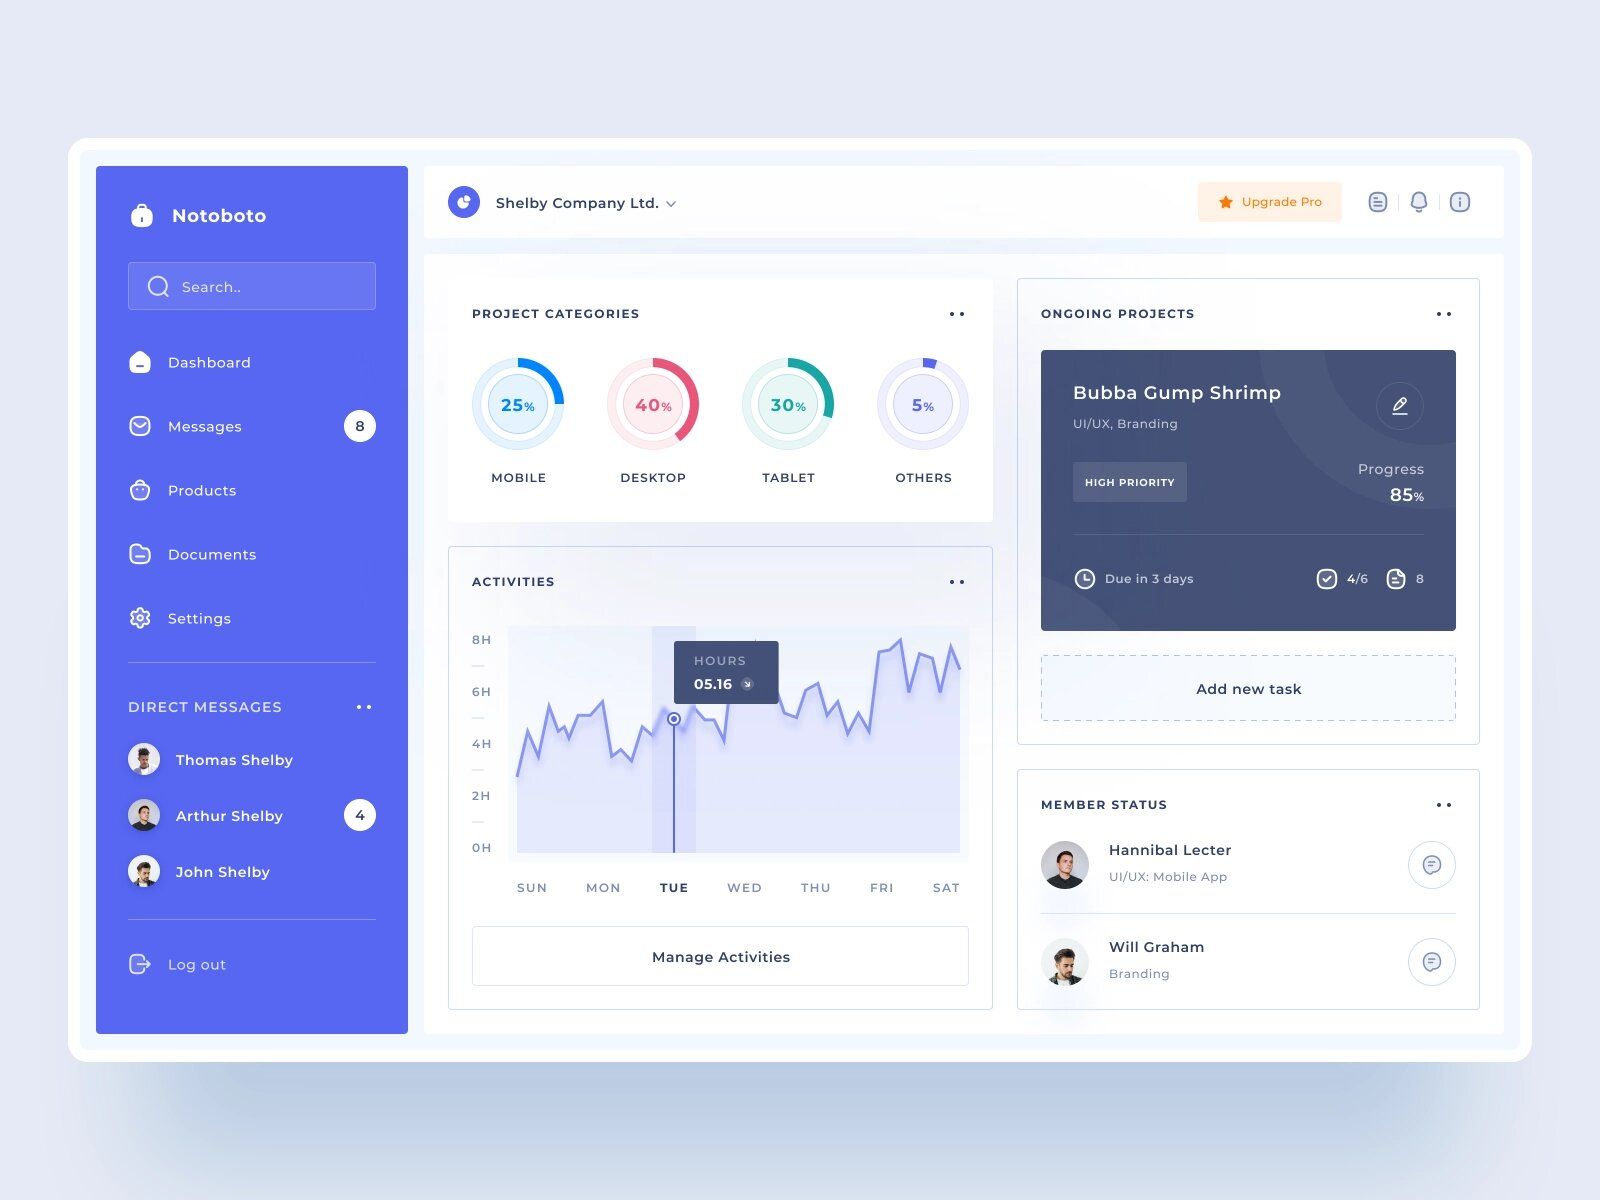 Custom task management app or software can help you with dealing multiple tasks like making project plan or recurring tasks like enable progress tracking (*image by [Choirul Syafril](https://dribbble.com/choirulsyafril){ rel="nofollow" target="_blank" .default-md}*)